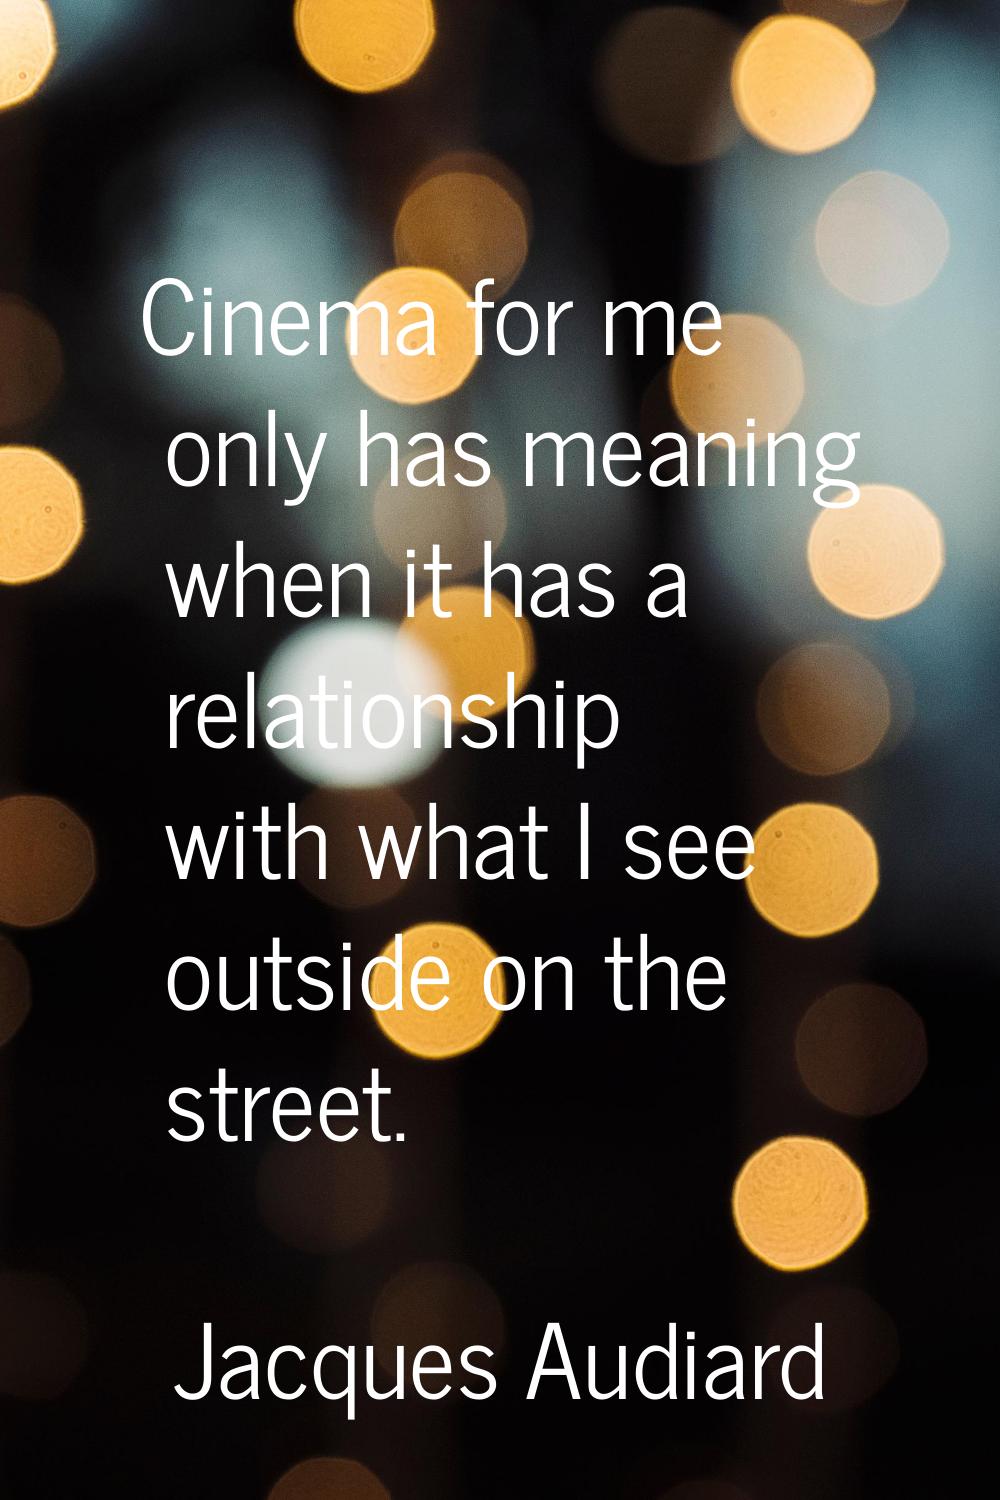 Cinema for me only has meaning when it has a relationship with what I see outside on the street.